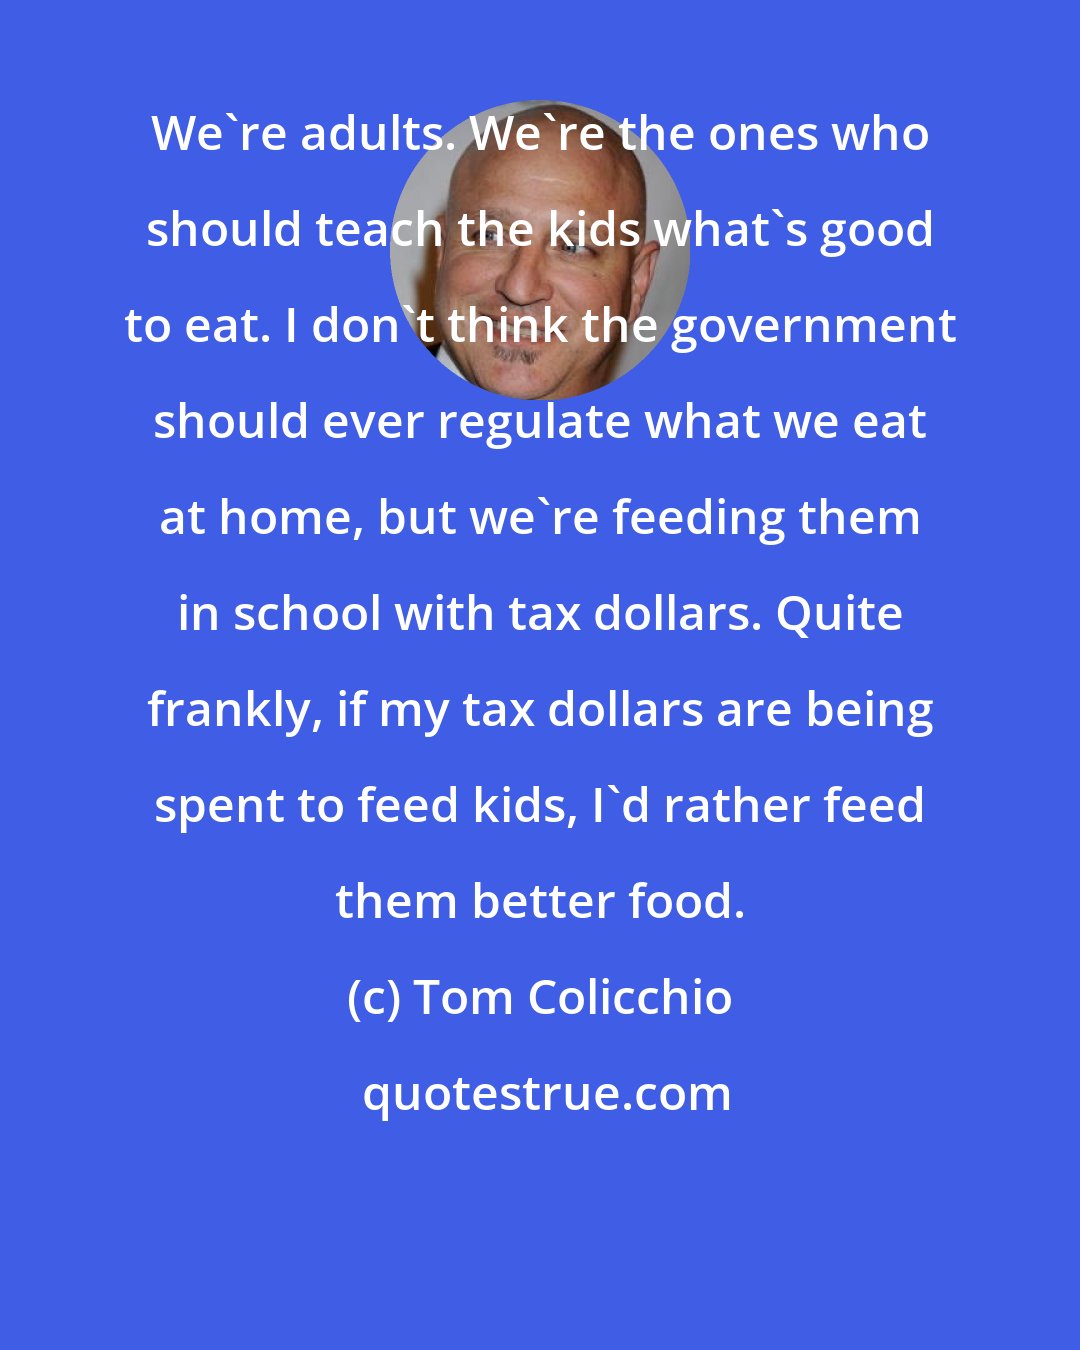 Tom Colicchio: We're adults. We're the ones who should teach the kids what's good to eat. I don't think the government should ever regulate what we eat at home, but we're feeding them in school with tax dollars. Quite frankly, if my tax dollars are being spent to feed kids, I'd rather feed them better food.